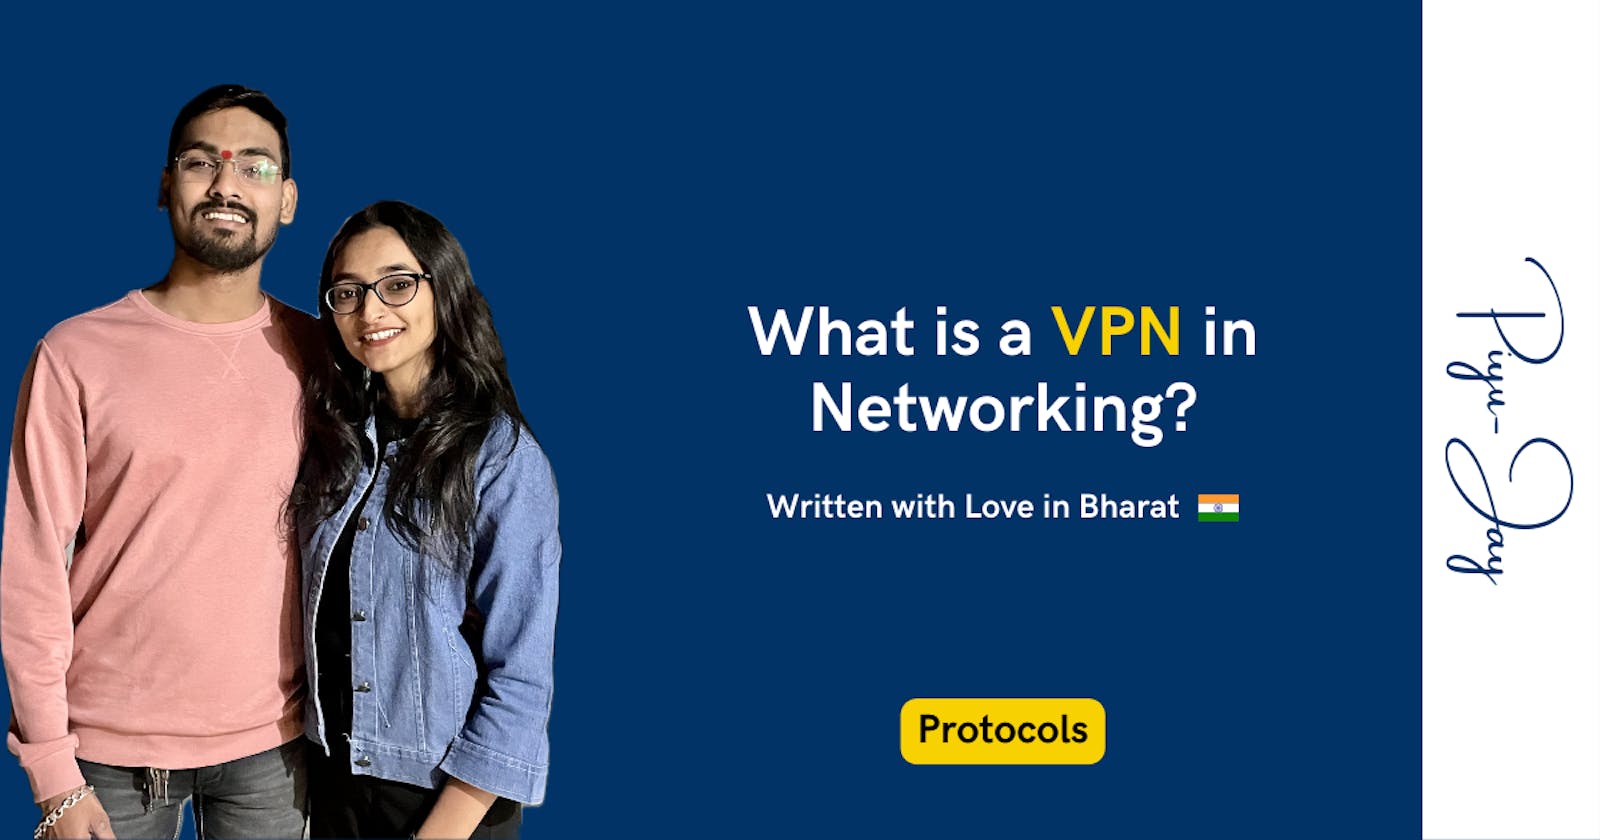 What is a VPN in Networking?